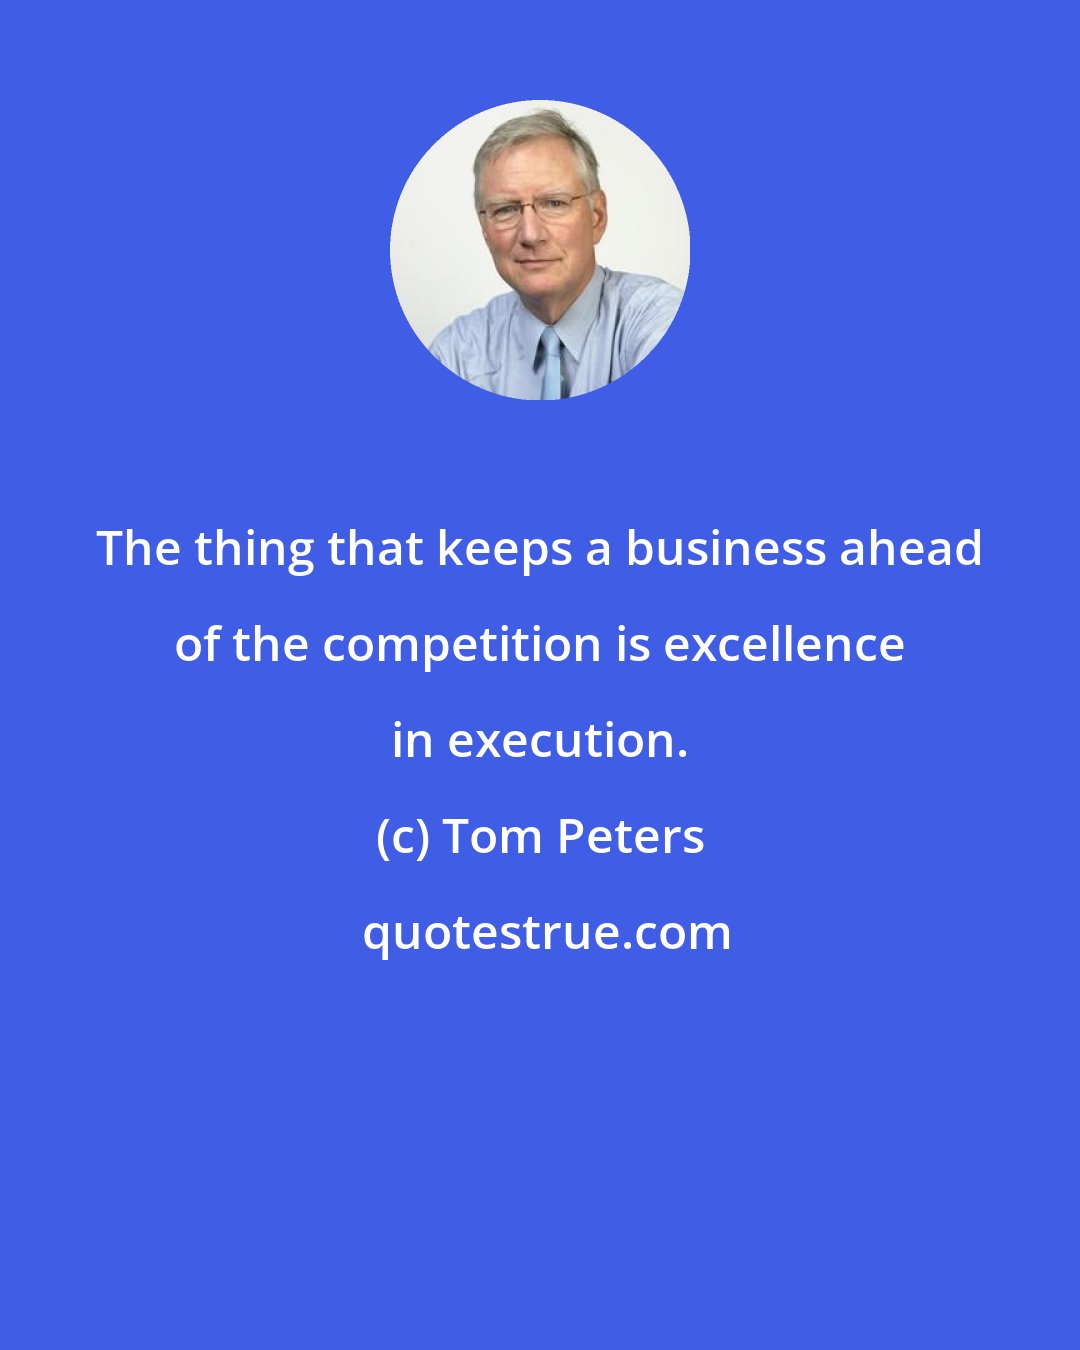 Tom Peters: The thing that keeps a business ahead of the competition is excellence in execution.